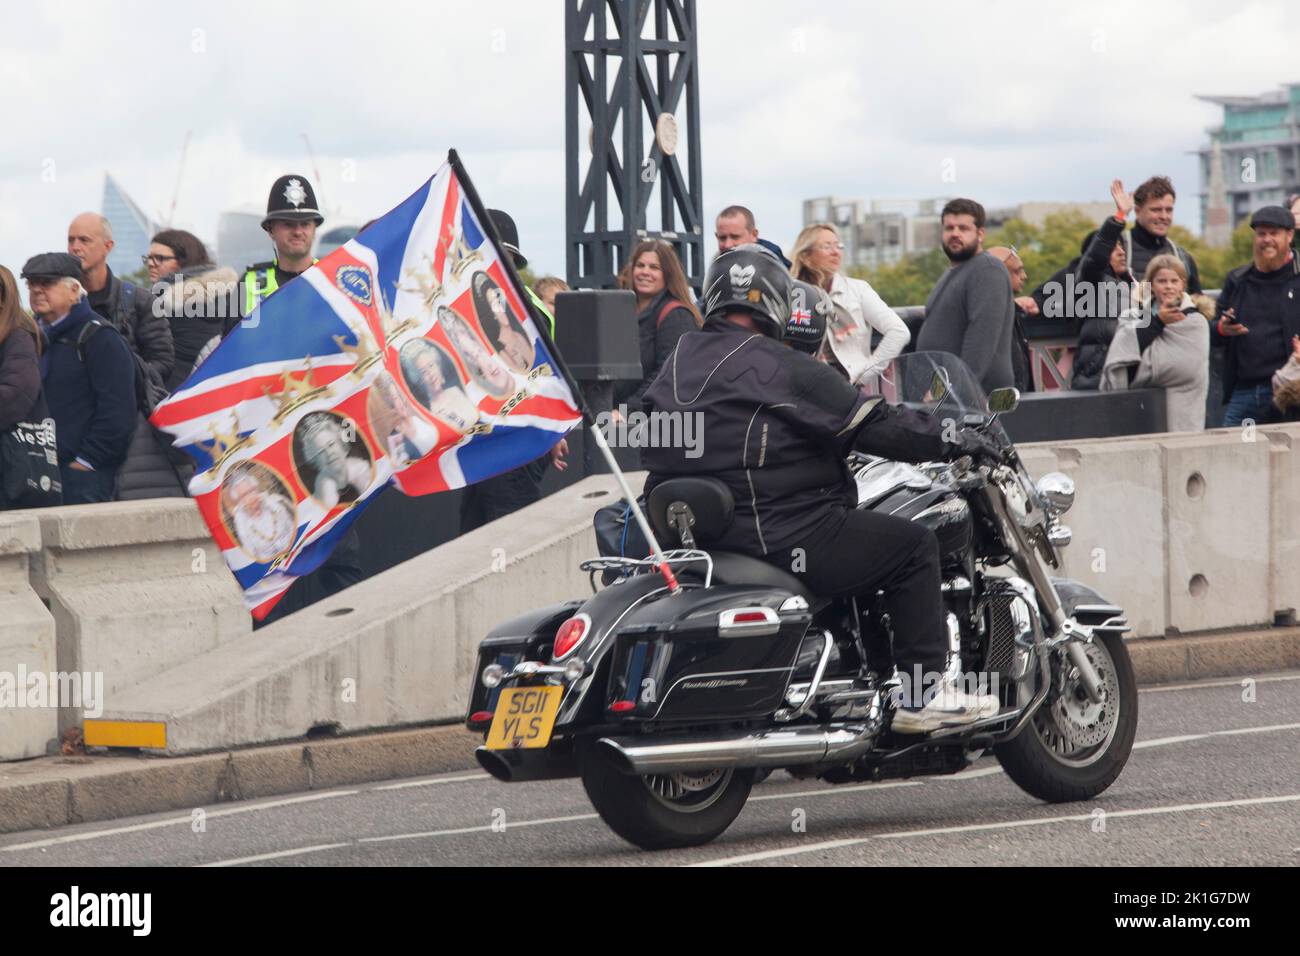 London, UK, 18 September 2022: A motorbike with a flag of the late Queen drives past mourners who are queueing on Lambeth Bridge to pay their respects to the late monarch Queen Elizabeth II, whose funeral takes place tomorrow. The queue for admission to Westminster Hall has now closed in order for all of those already in the queue to pass through before 6.30am tomorrow morning. Anna Watson/Alamy Live News Stock Photo